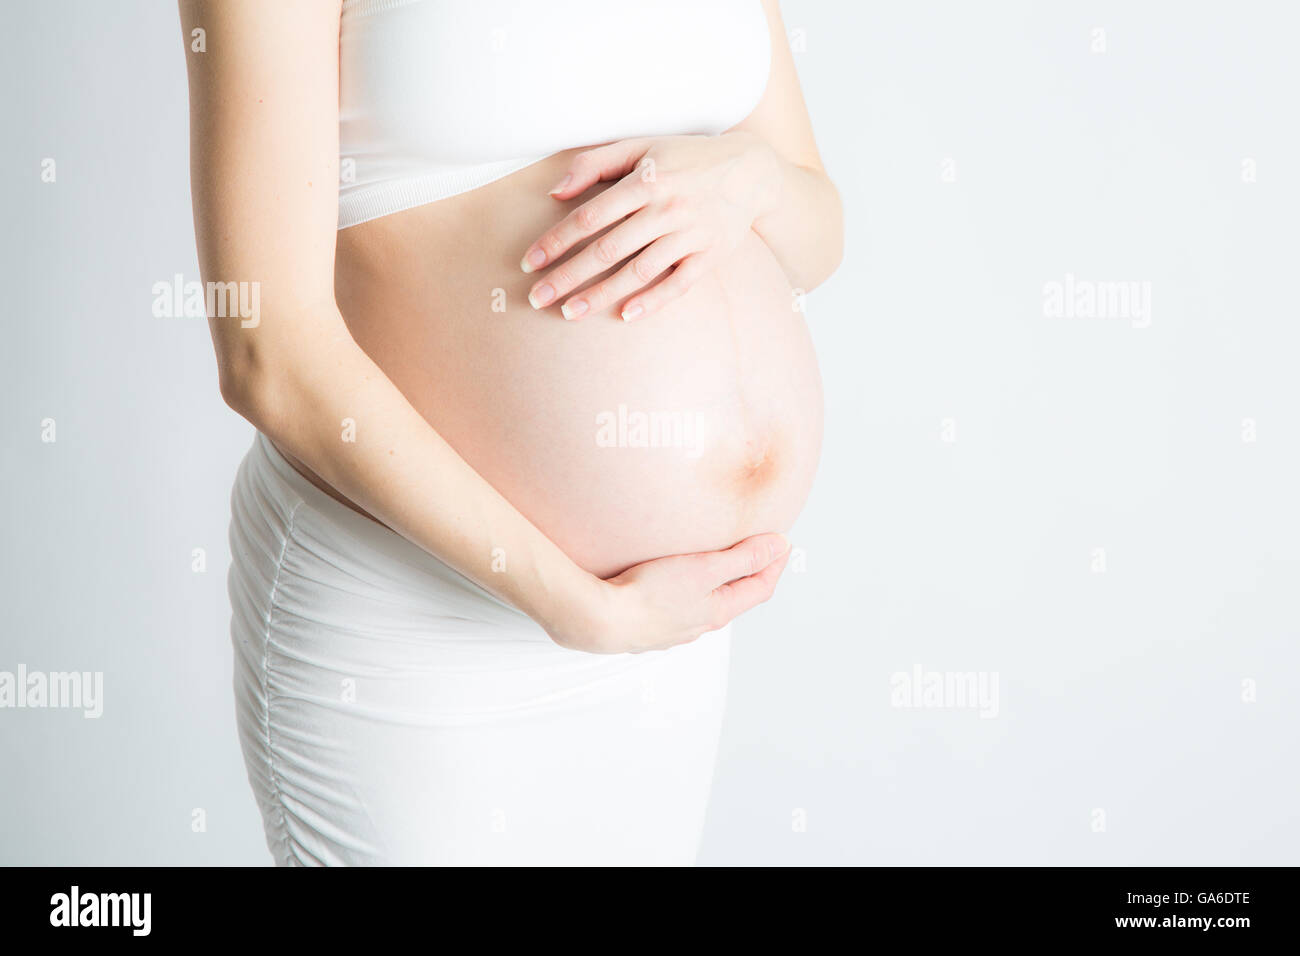 A woman craddles her pregnant belly. 9 months pregnant. Stock Photo